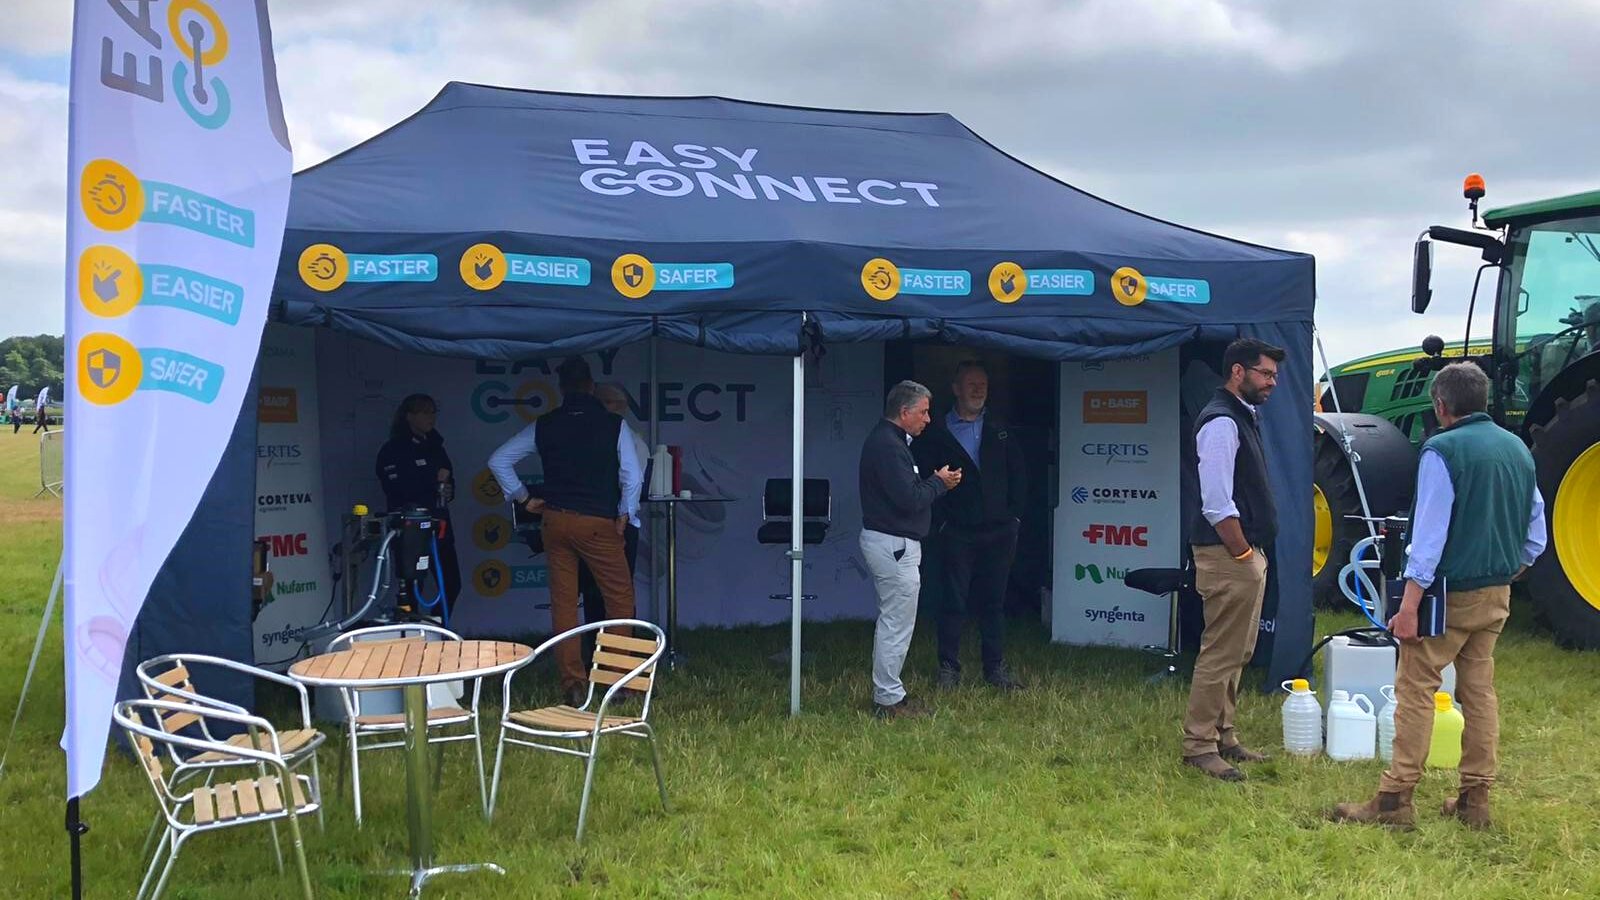 John Sellars at Cereals with EasyConnect